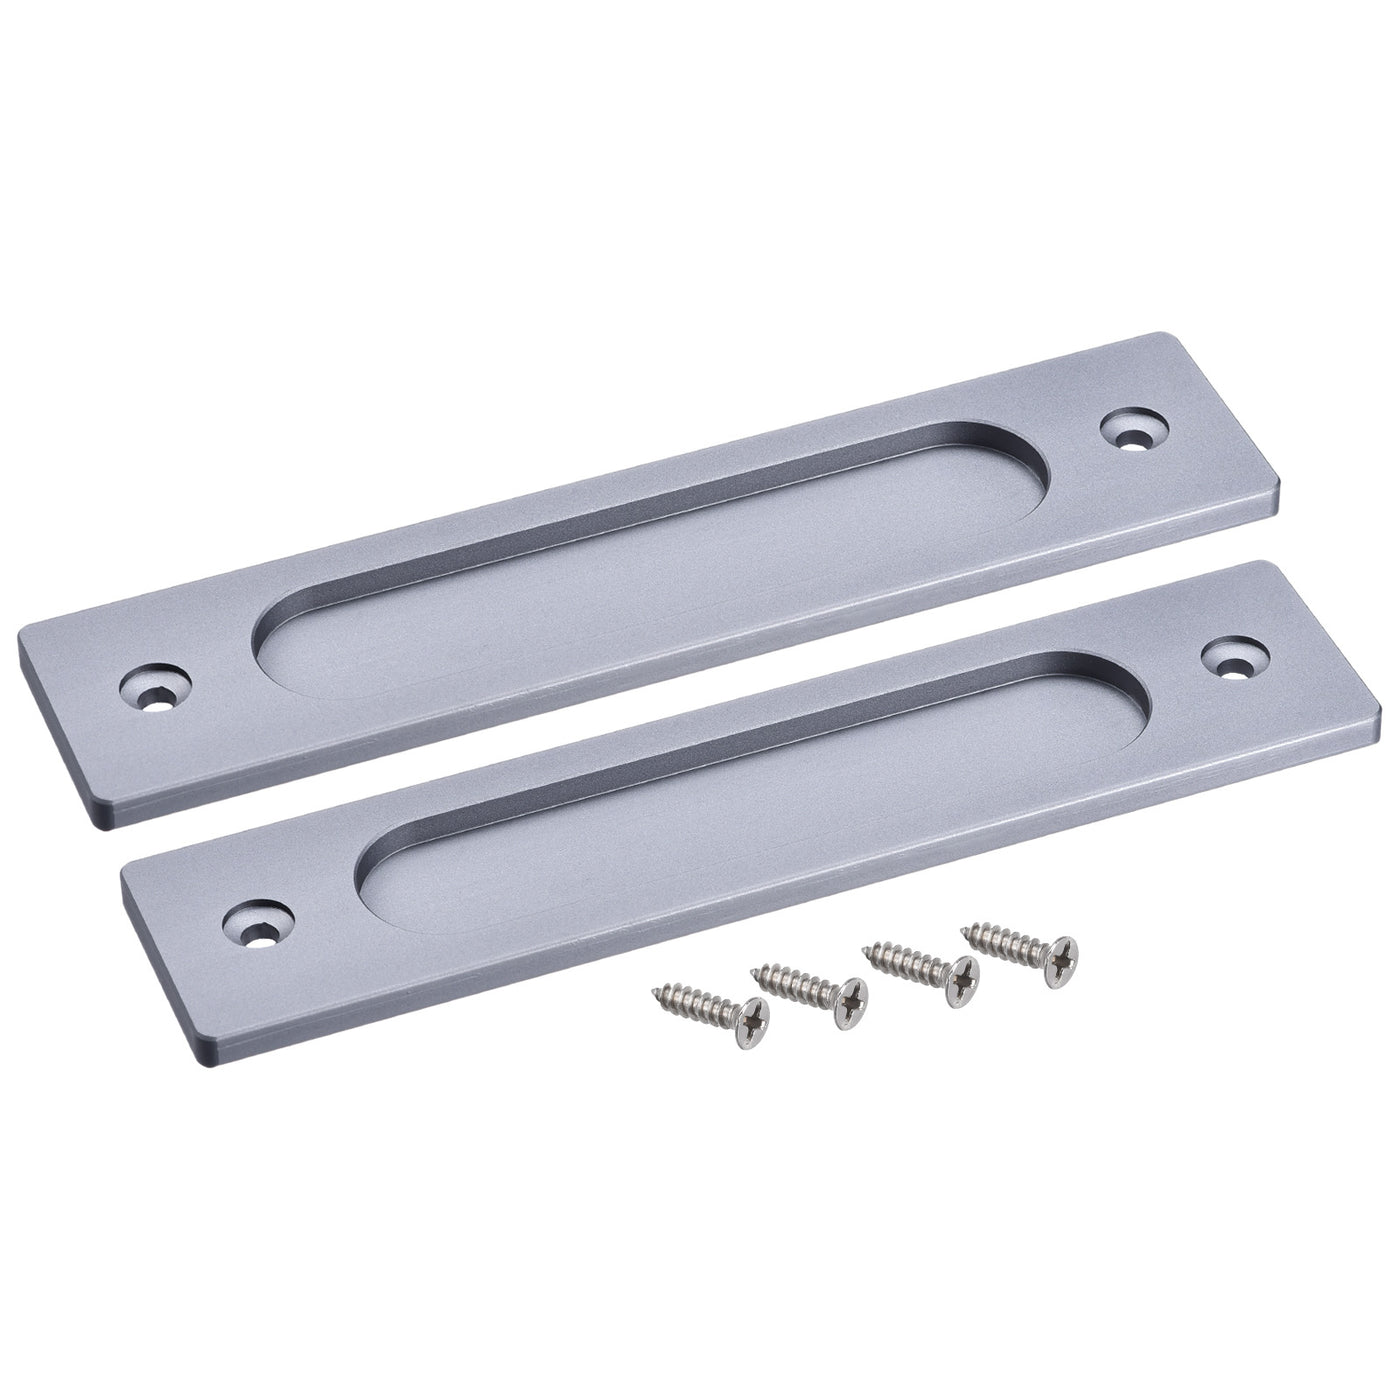 uxcell Uxcell Finger Flush Pull Handle 180x40x5.7mm Rectangle for Drawer Door Grey 2pcs